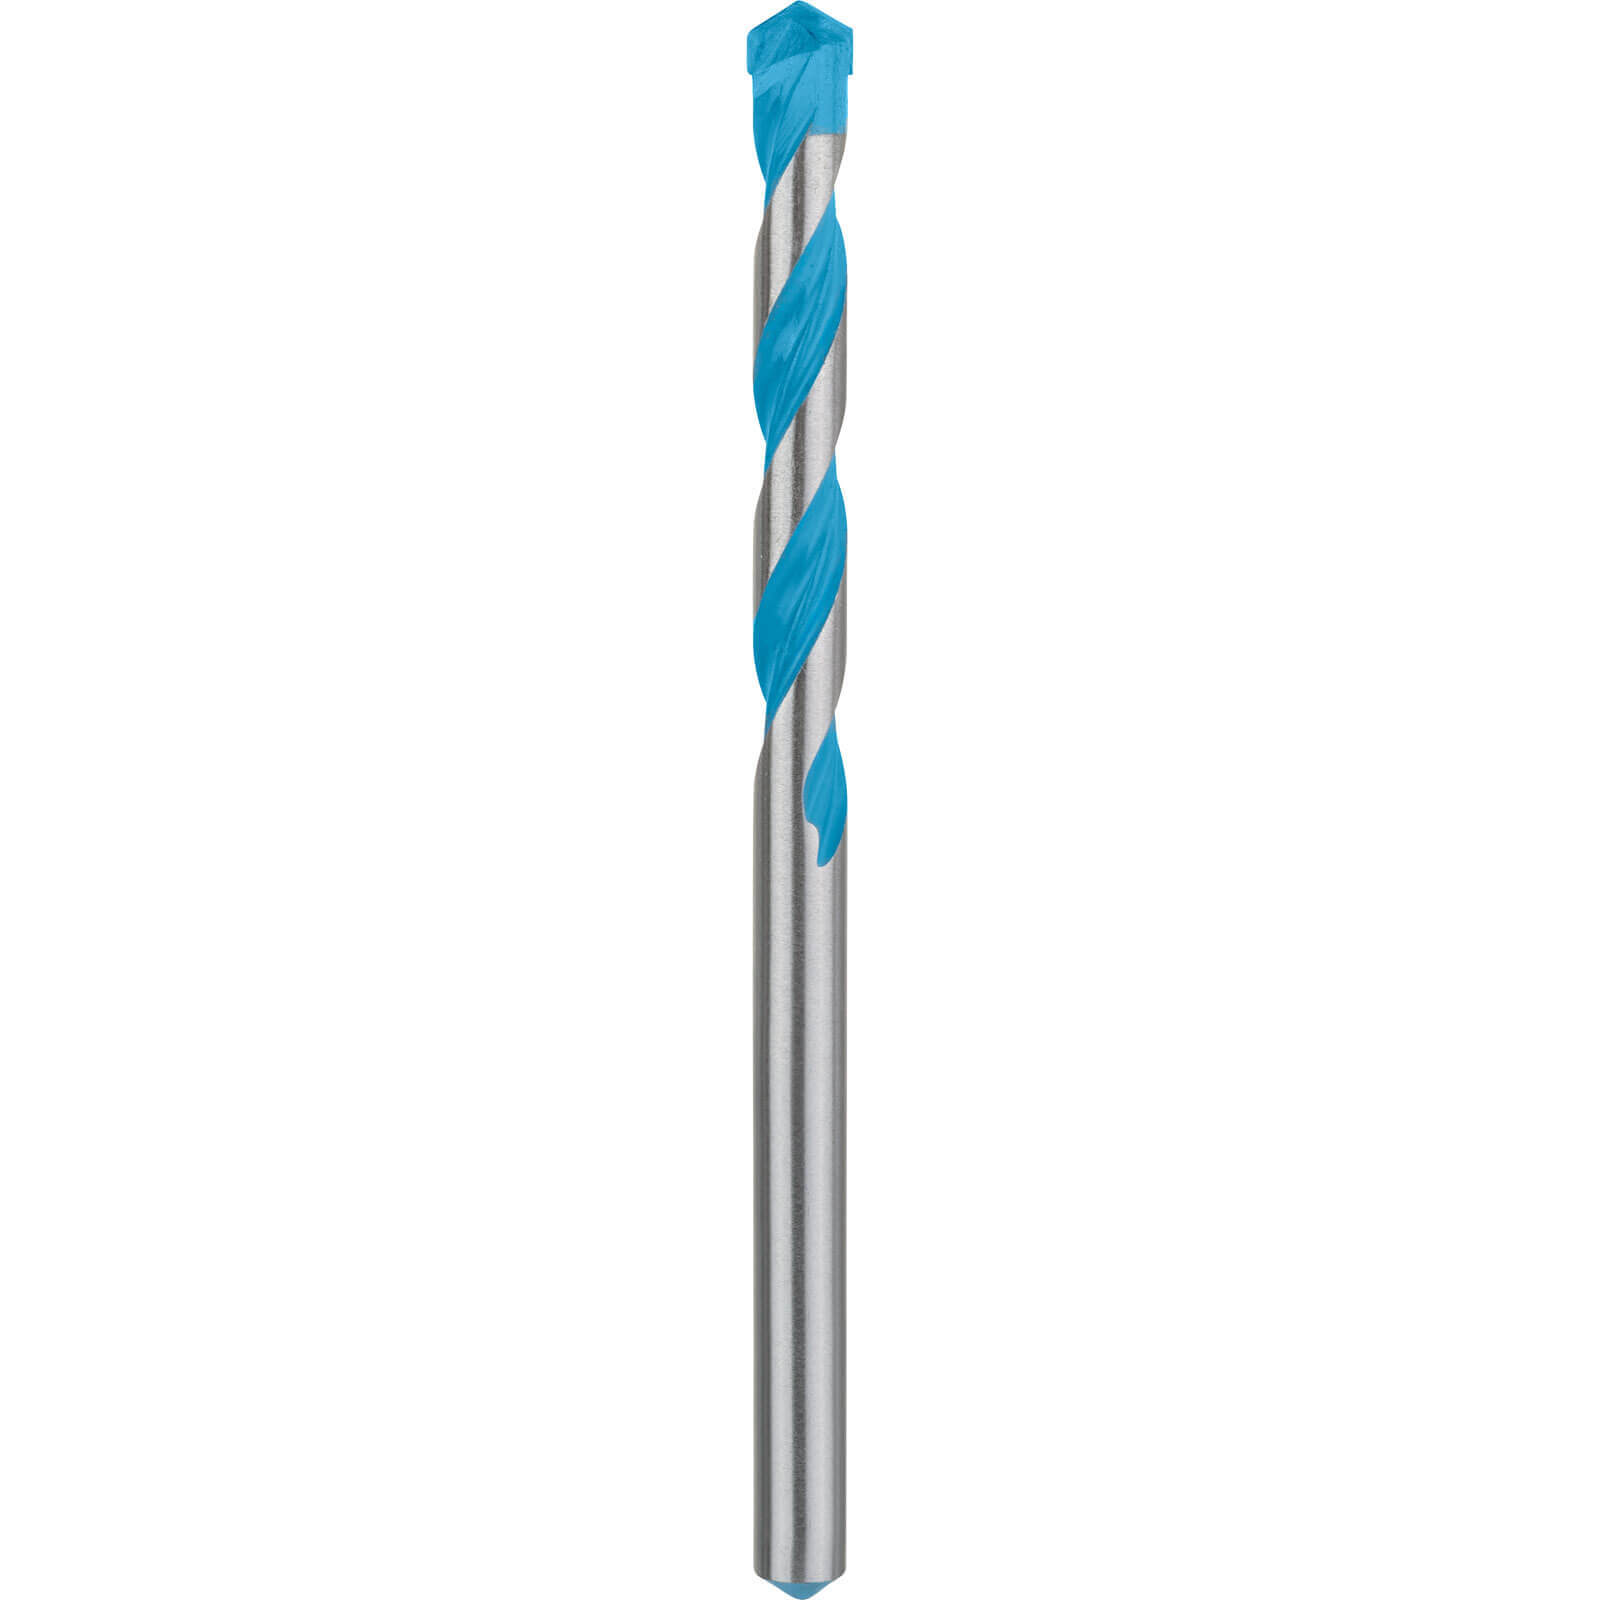 Photo of Bosch Expert Cyl-9 Multi Construction Drill Bit 10mm 150mm Pack Of 1